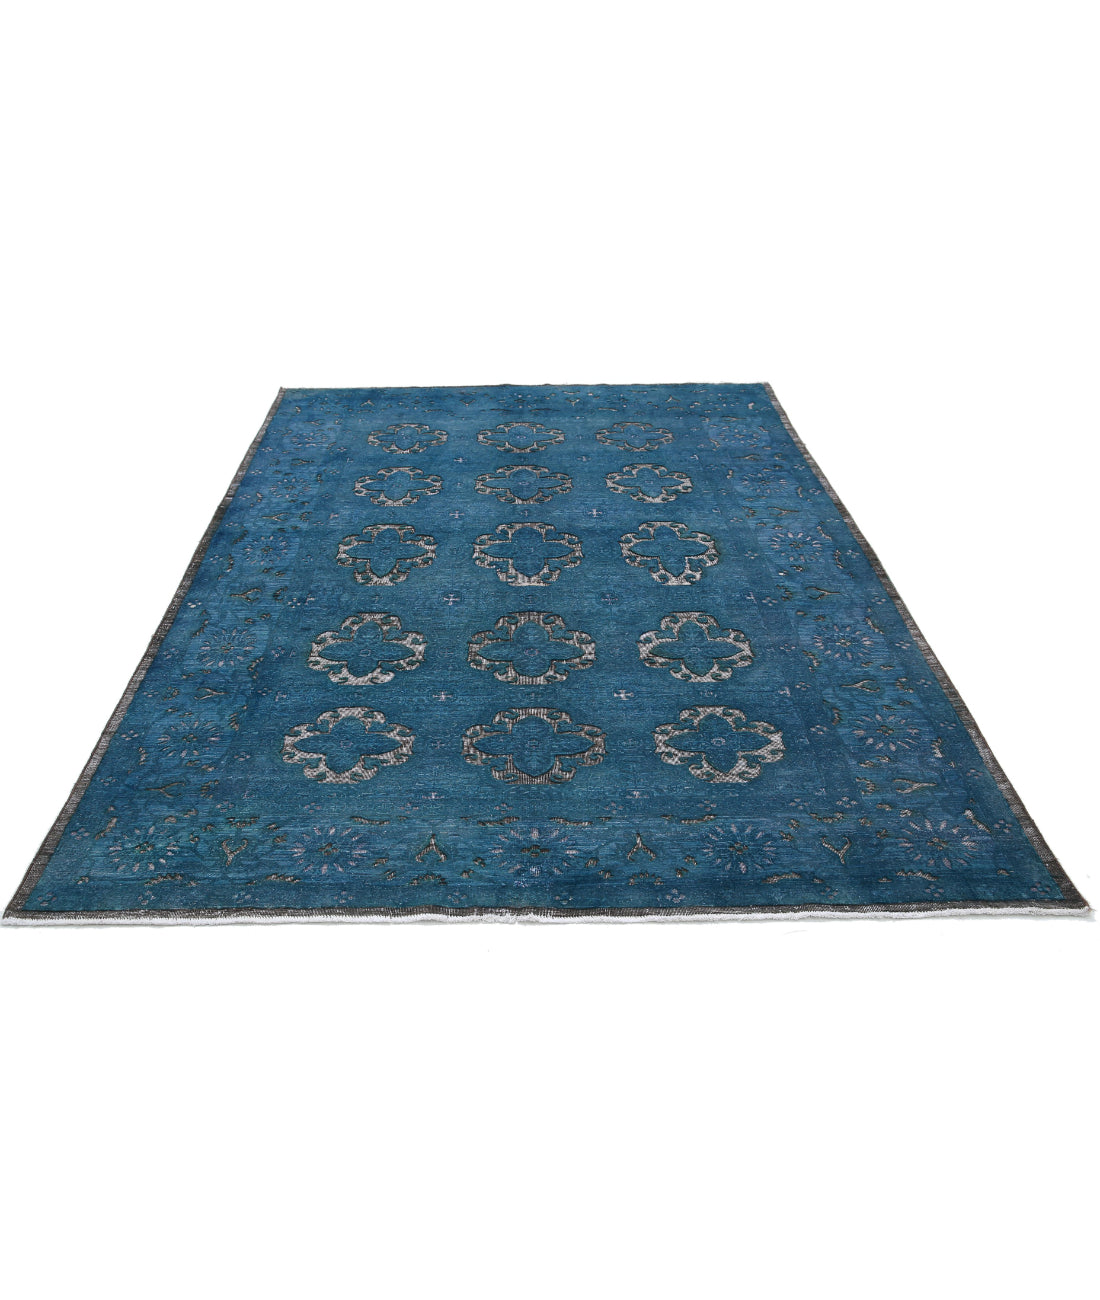 Hand Knotted Onyx Wool Rug - 6'2'' x 8'8'' 6'2'' x 8'8'' (185 X 260) / Blue / Blue